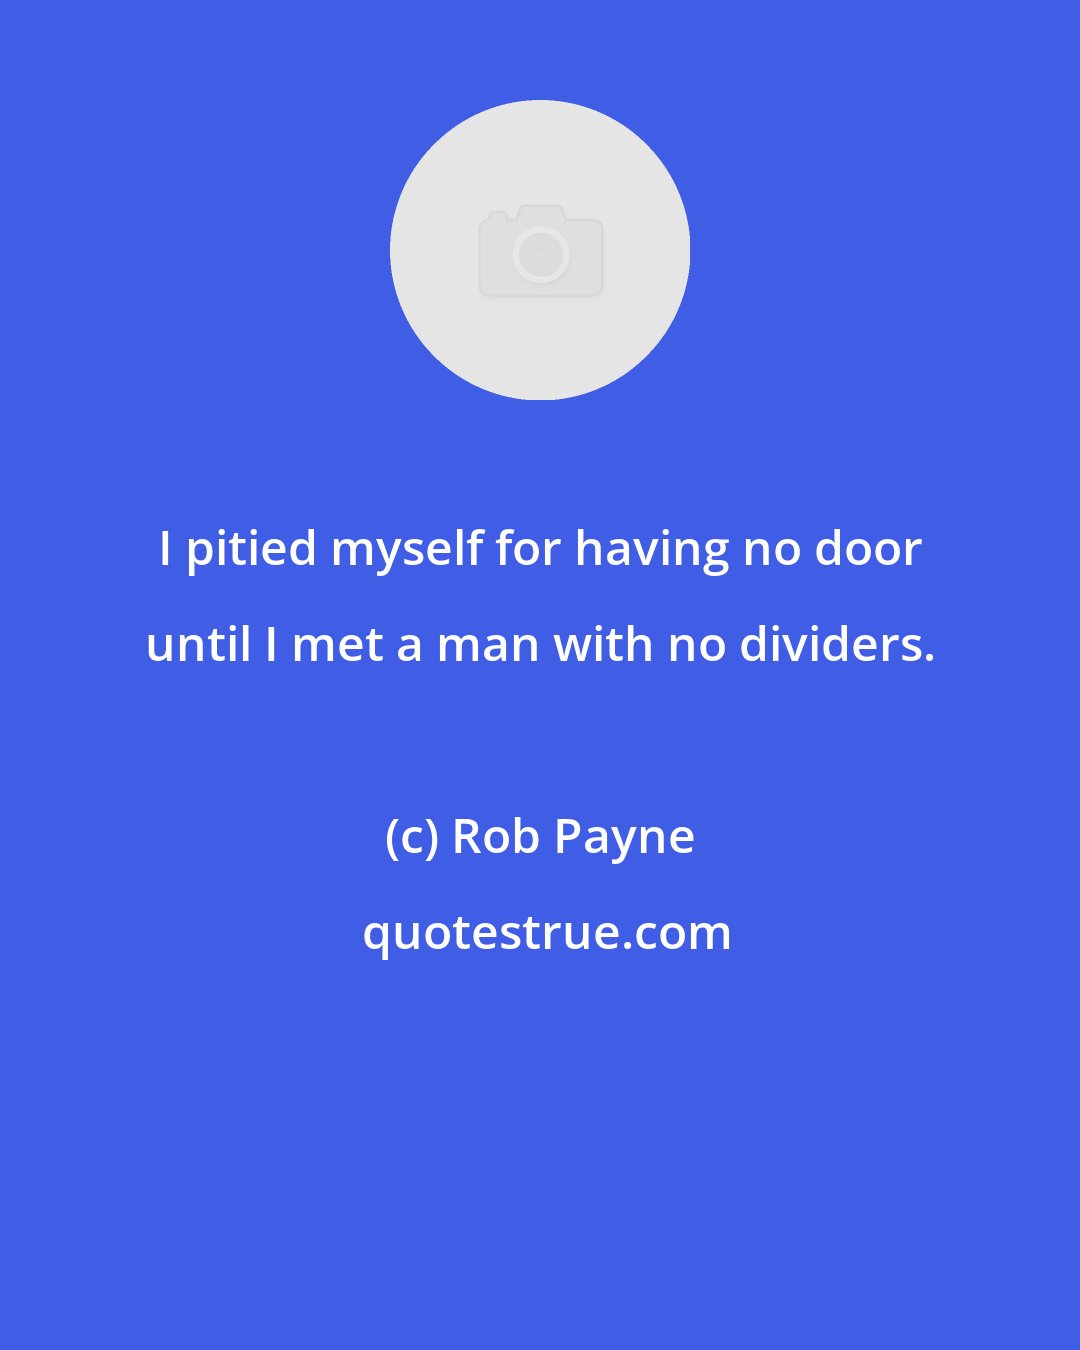 Rob Payne: I pitied myself for having no door until I met a man with no dividers.